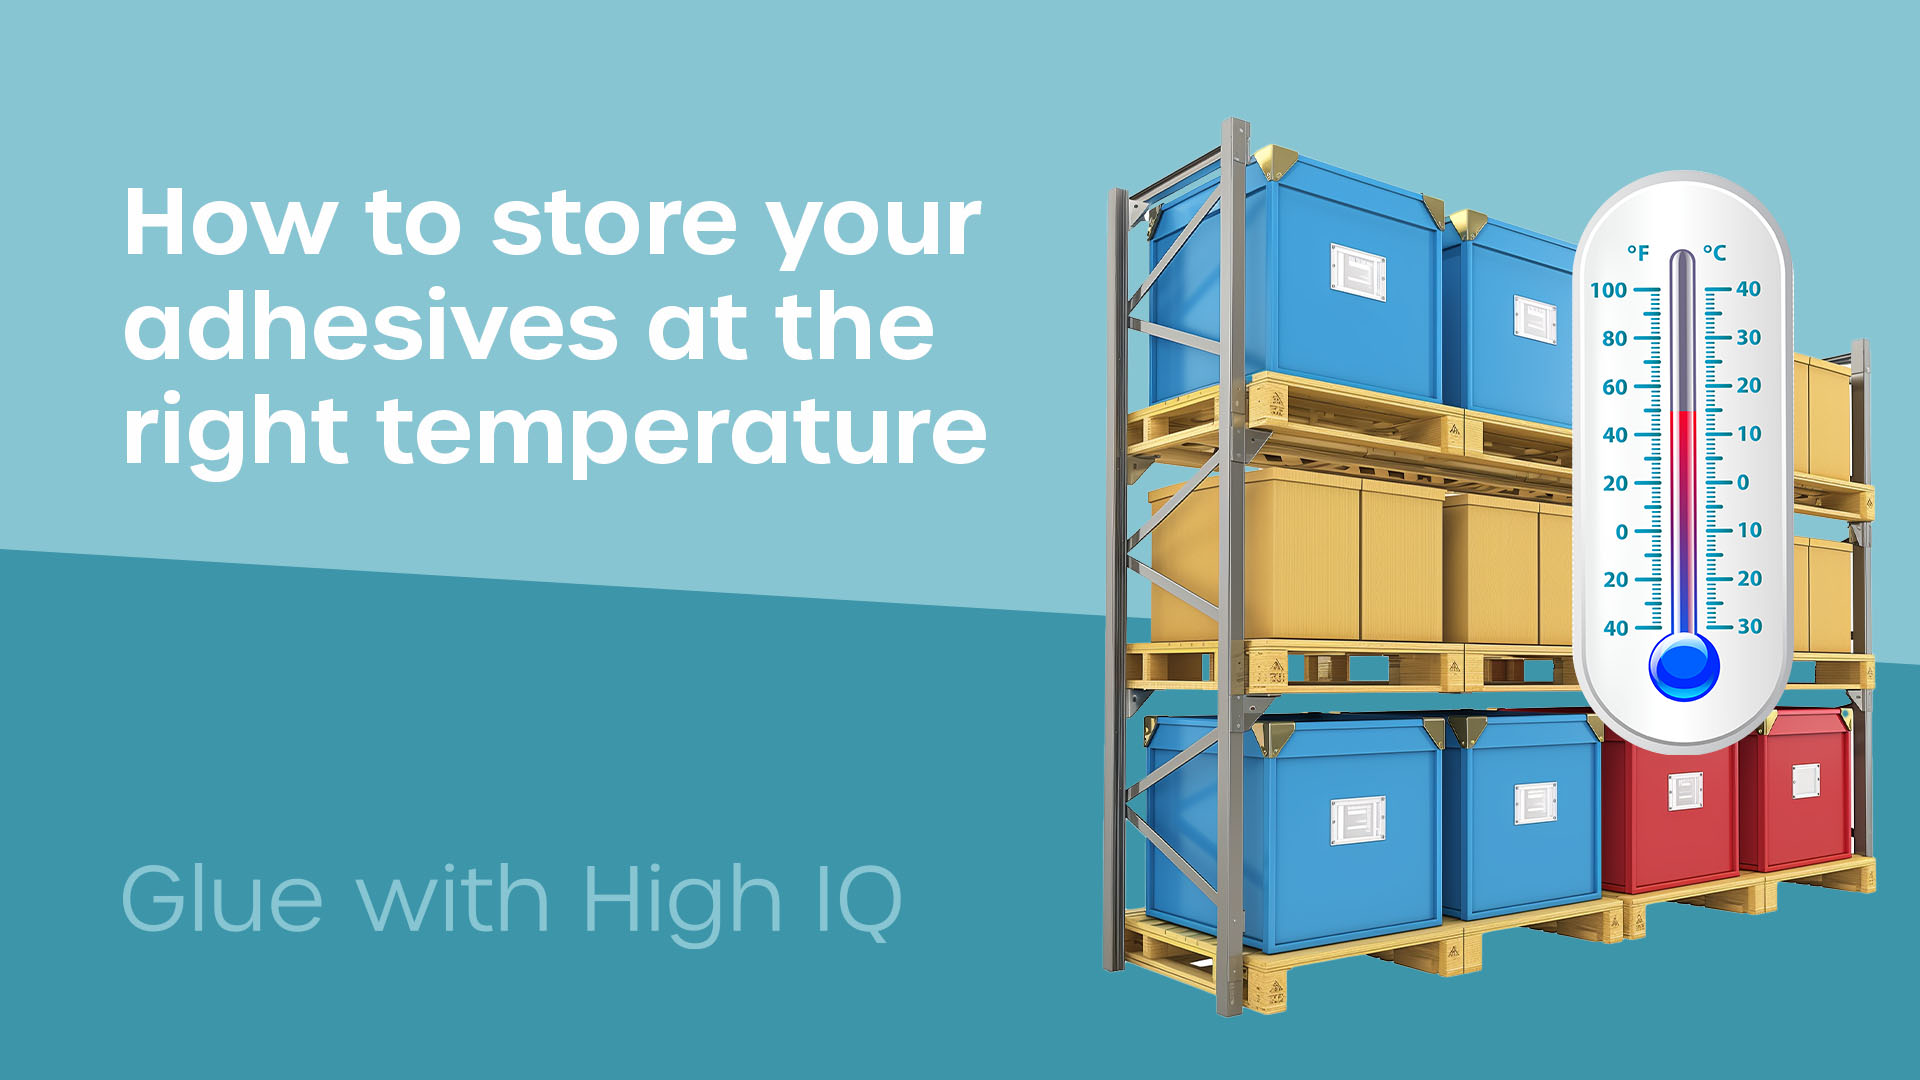 How to store adhesives at the right temperature